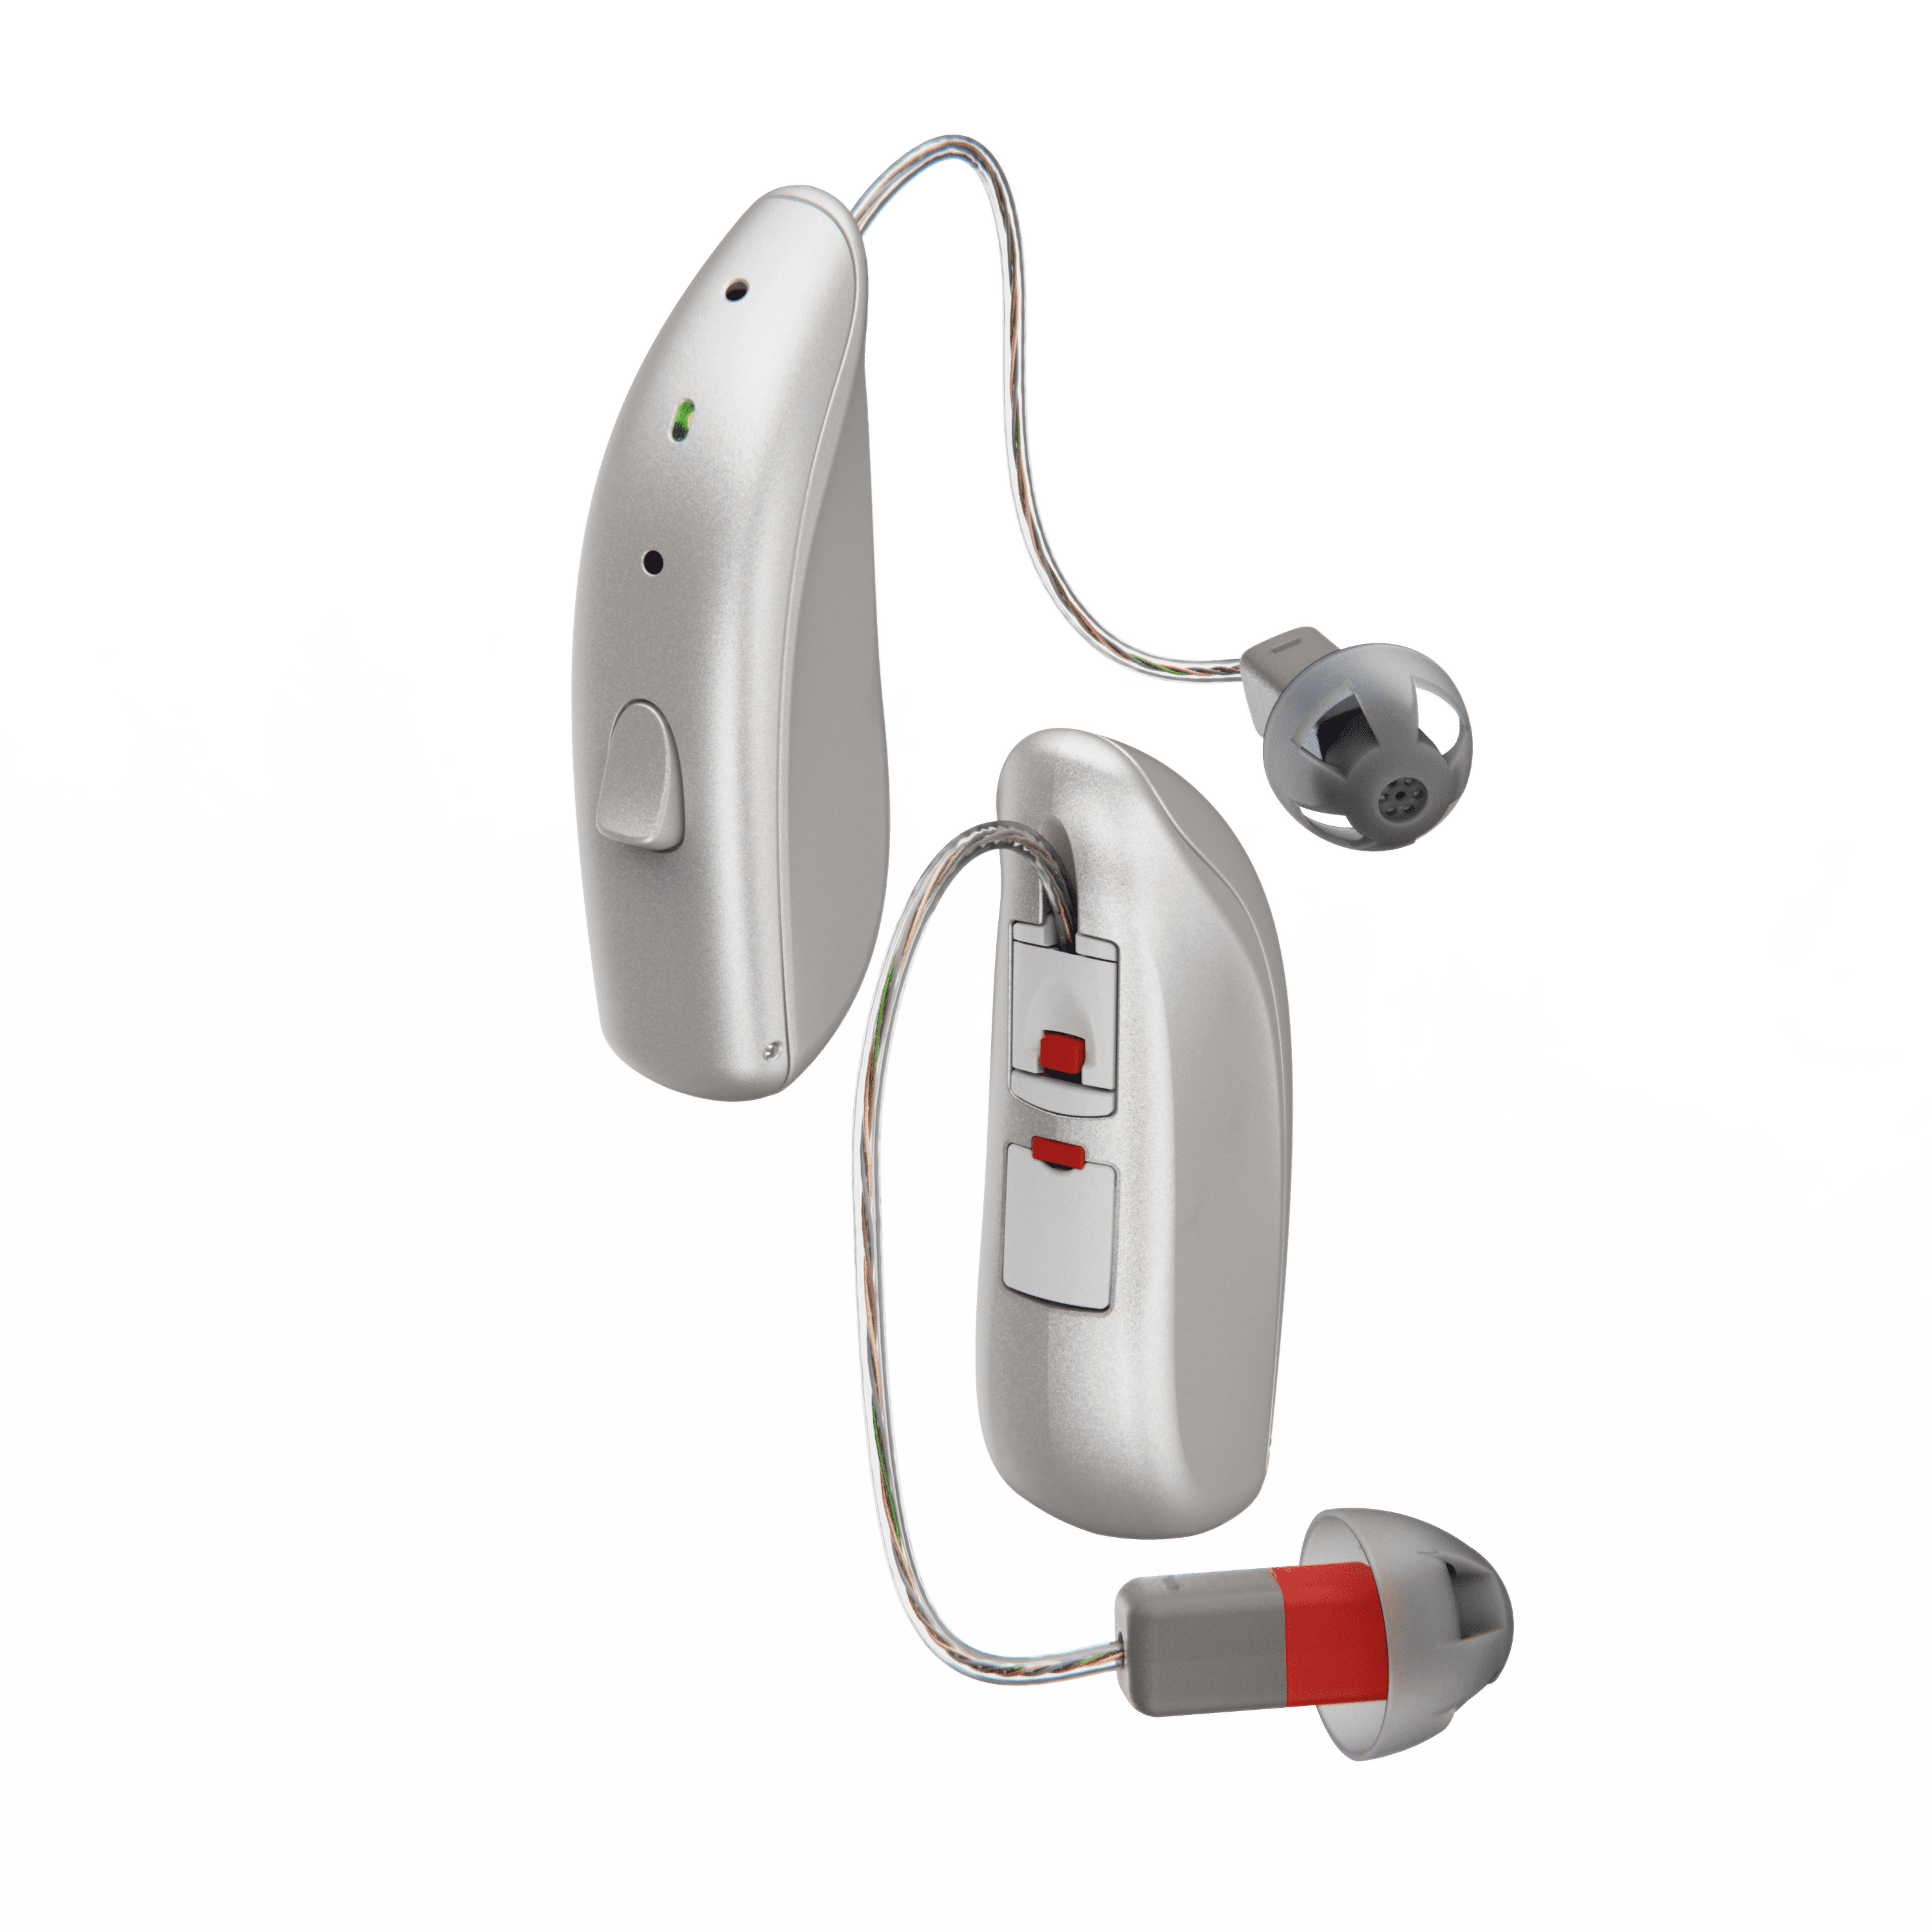 Lively 2 Pro Hearing Aids